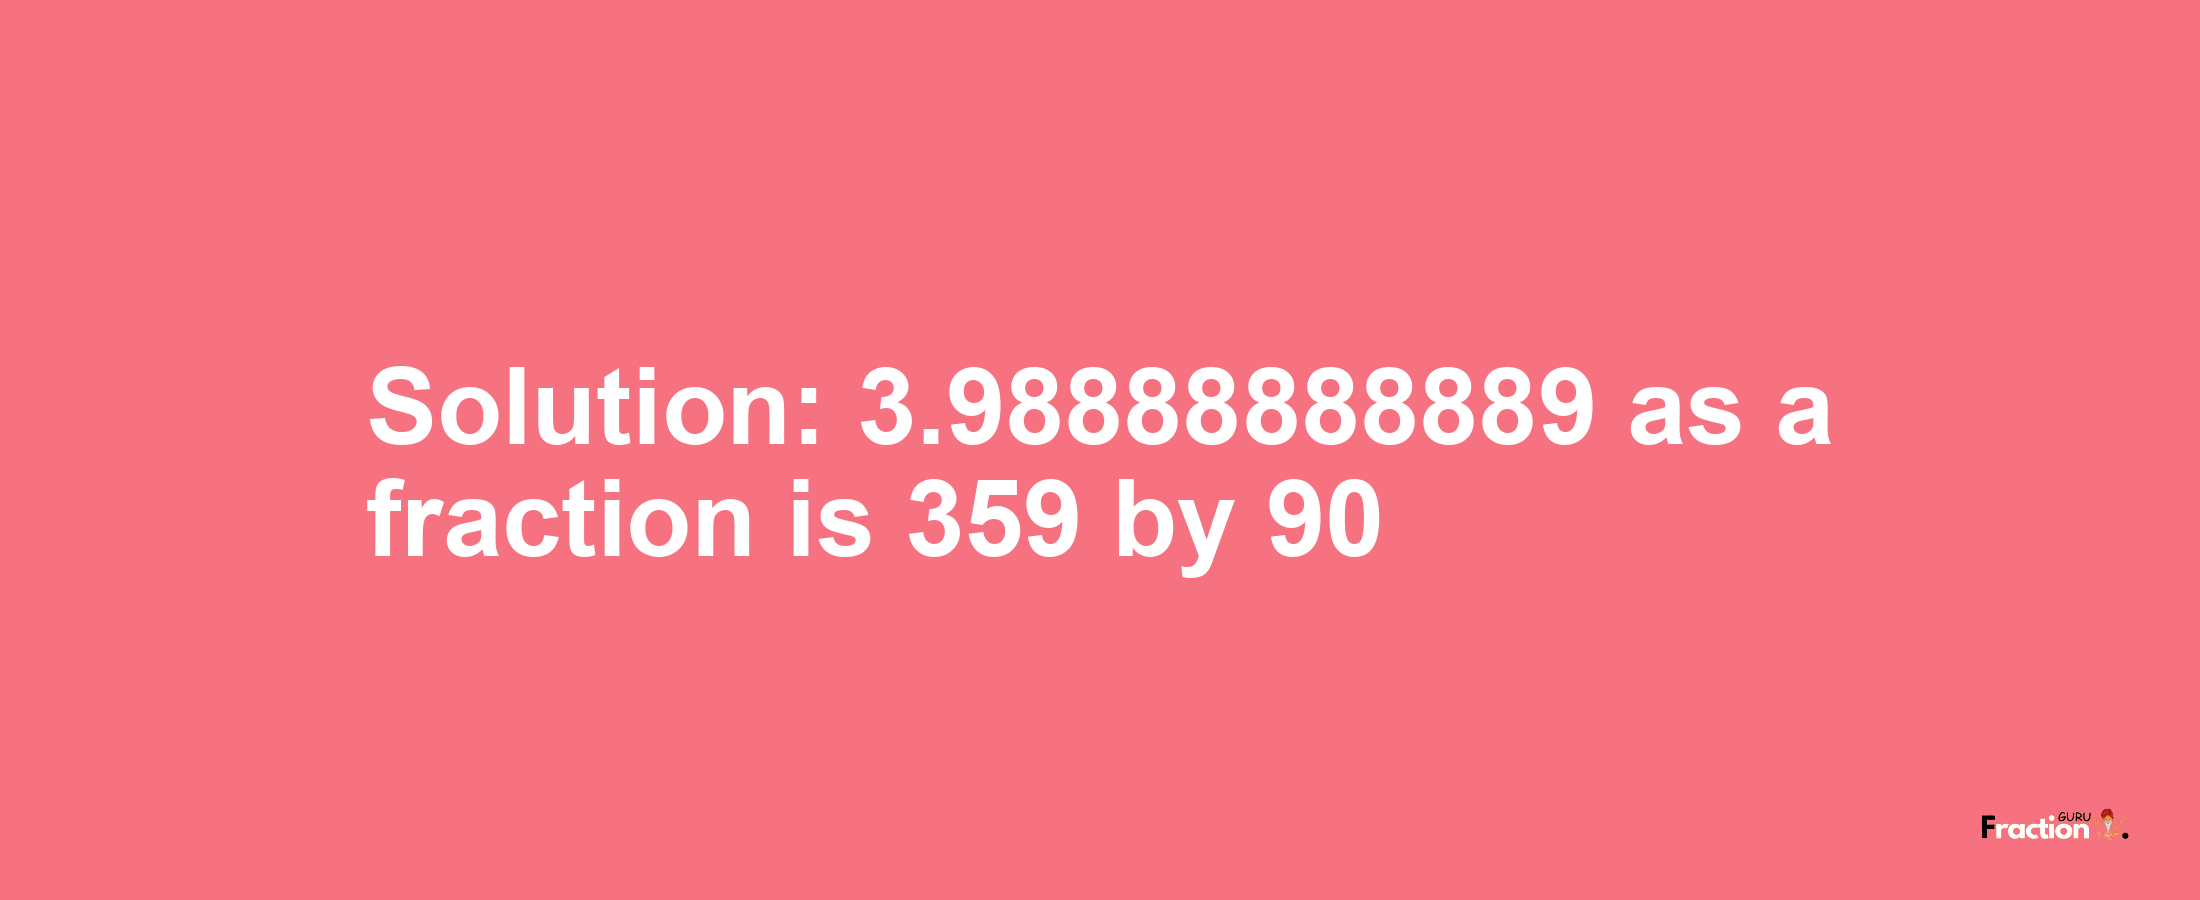 Solution:3.98888888889 as a fraction is 359/90